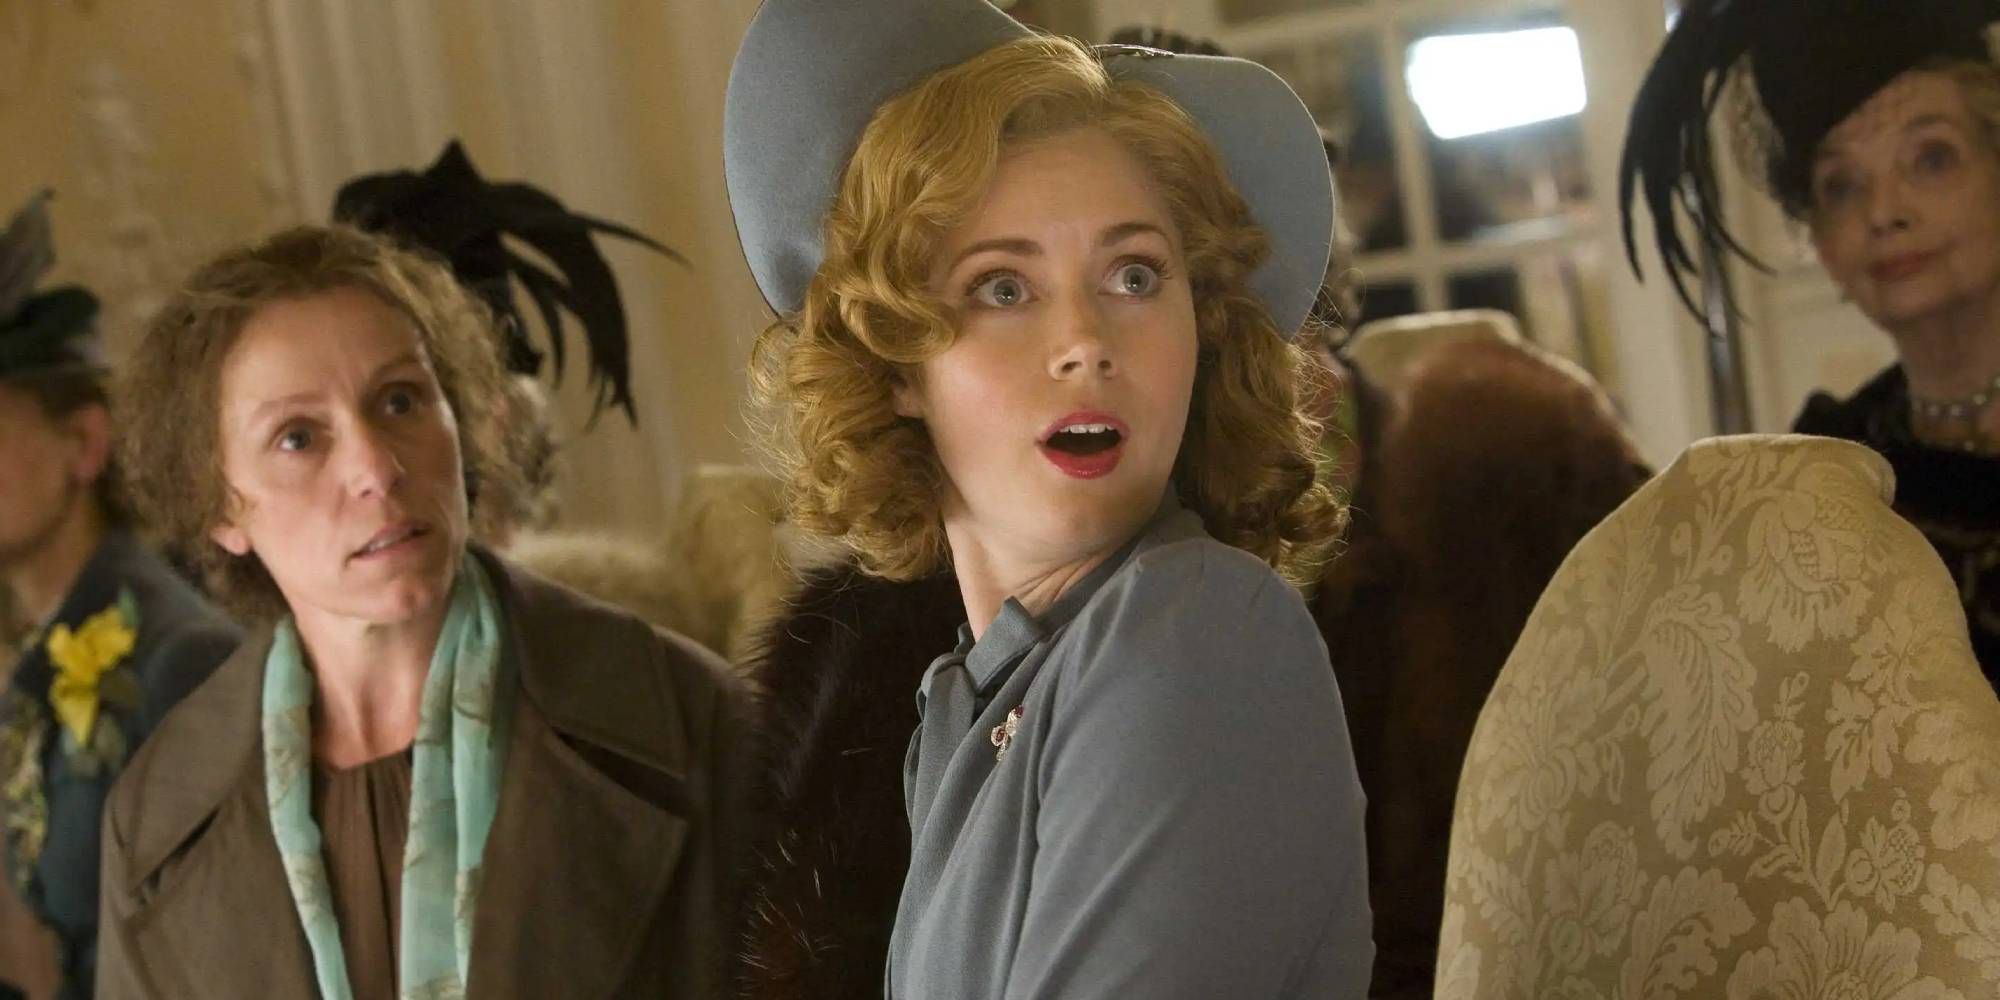 Frances McDormand and Amy Adams looking shocked as Miss Guinevere and Delysia Lafosse in Miss Pettigrew Lives for a Day.